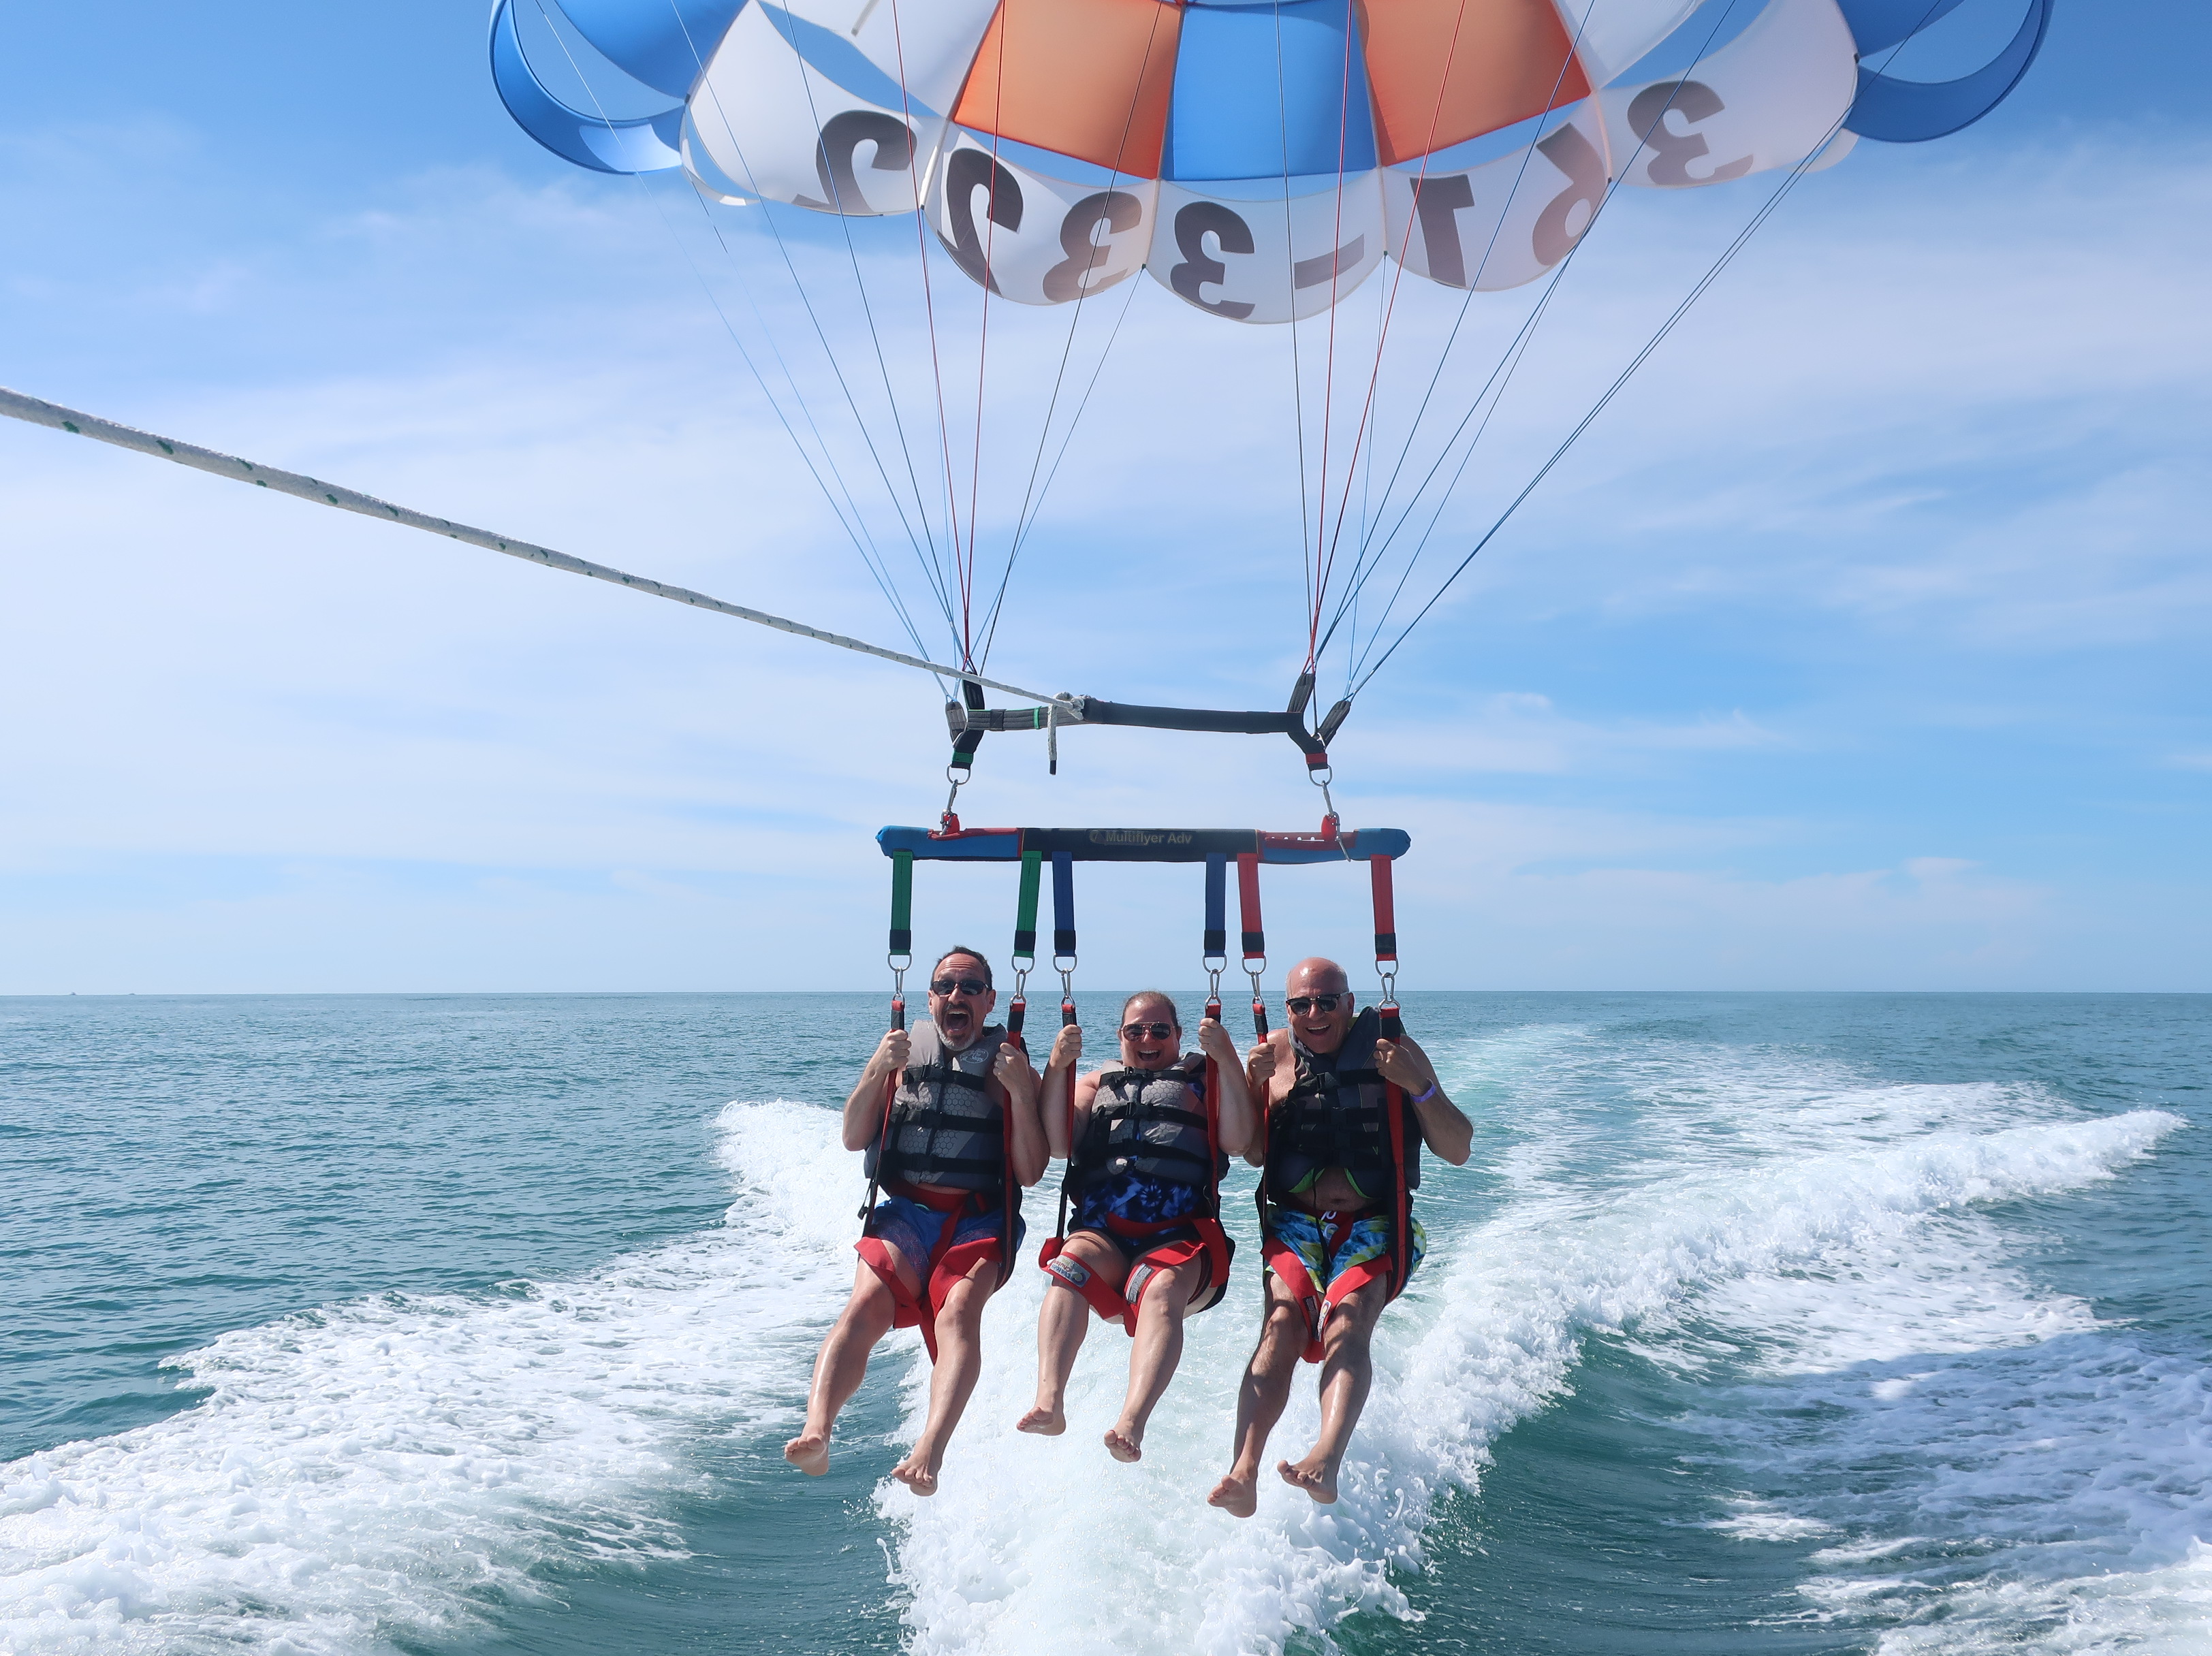 We went parasailing! OMG!! So much fun!...